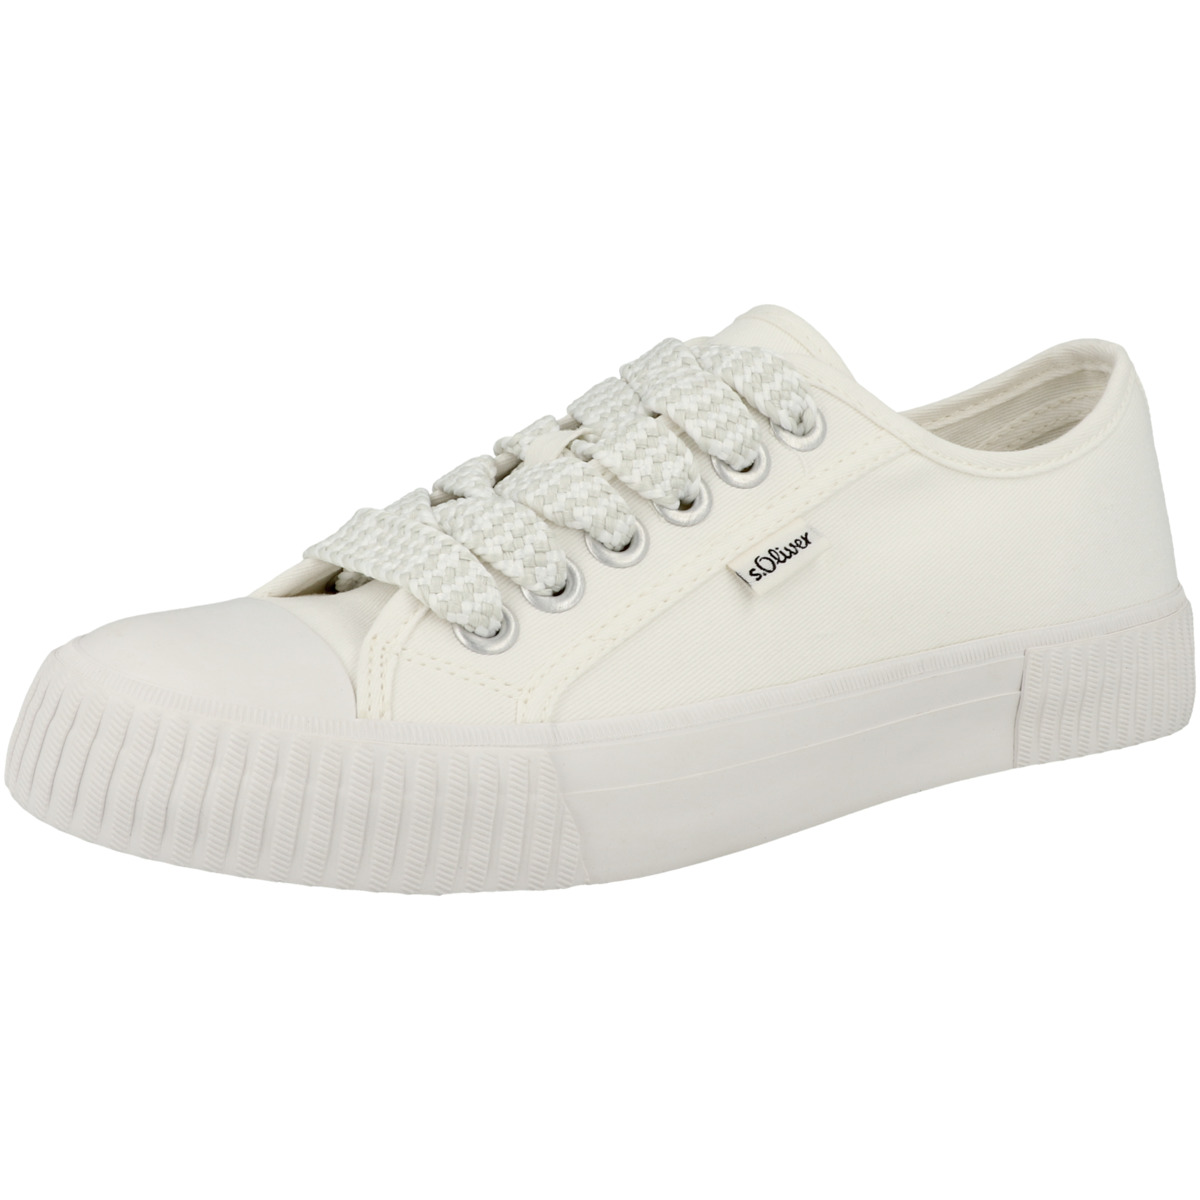 s.Oliver 5-23620-20 Sneaker low weiss